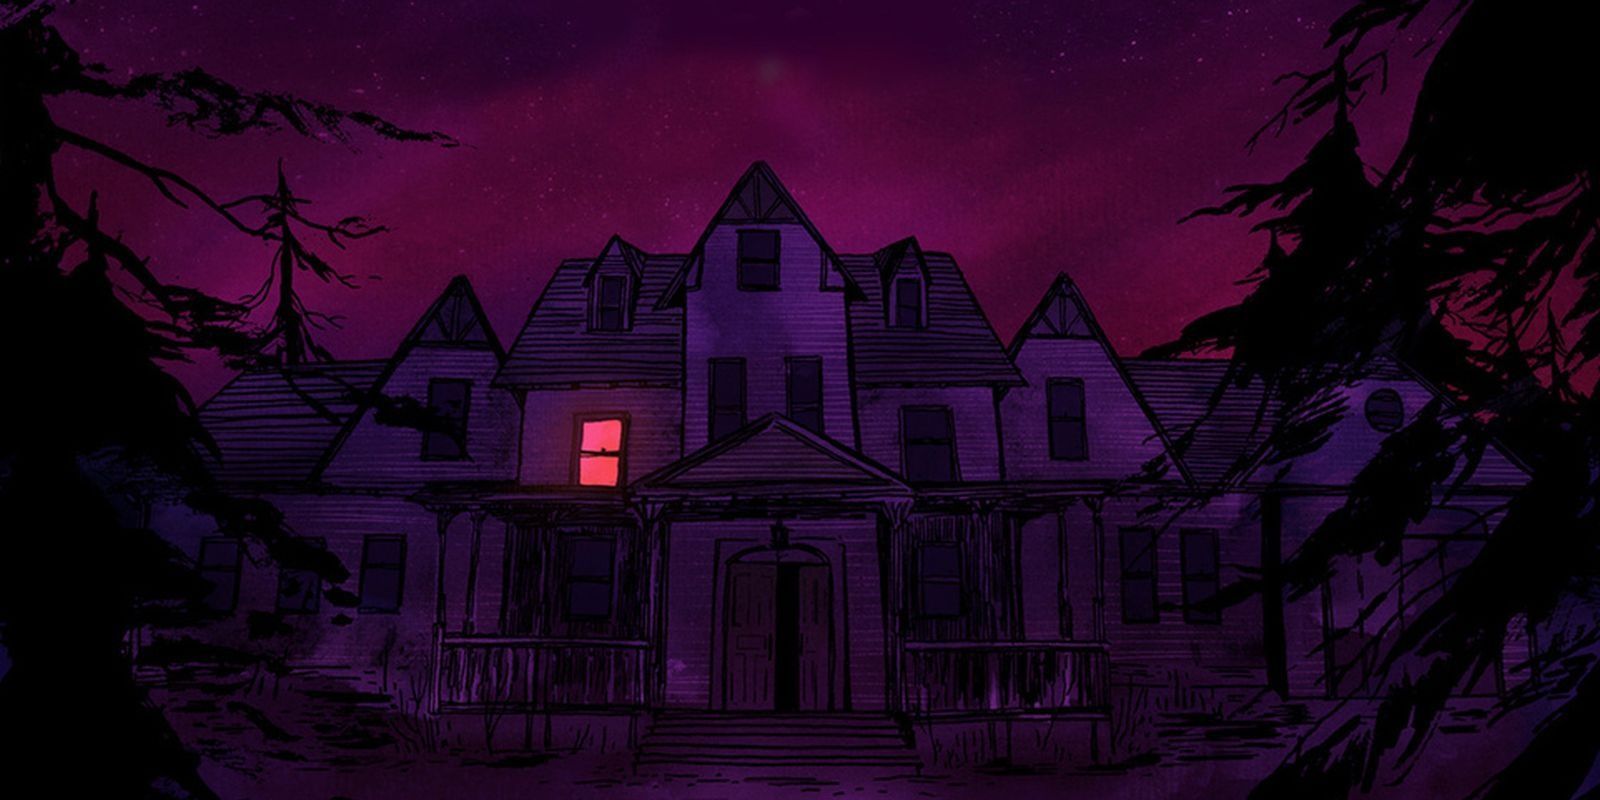 Gone Home's house shrouded in darkness with a single light shining through one window. 